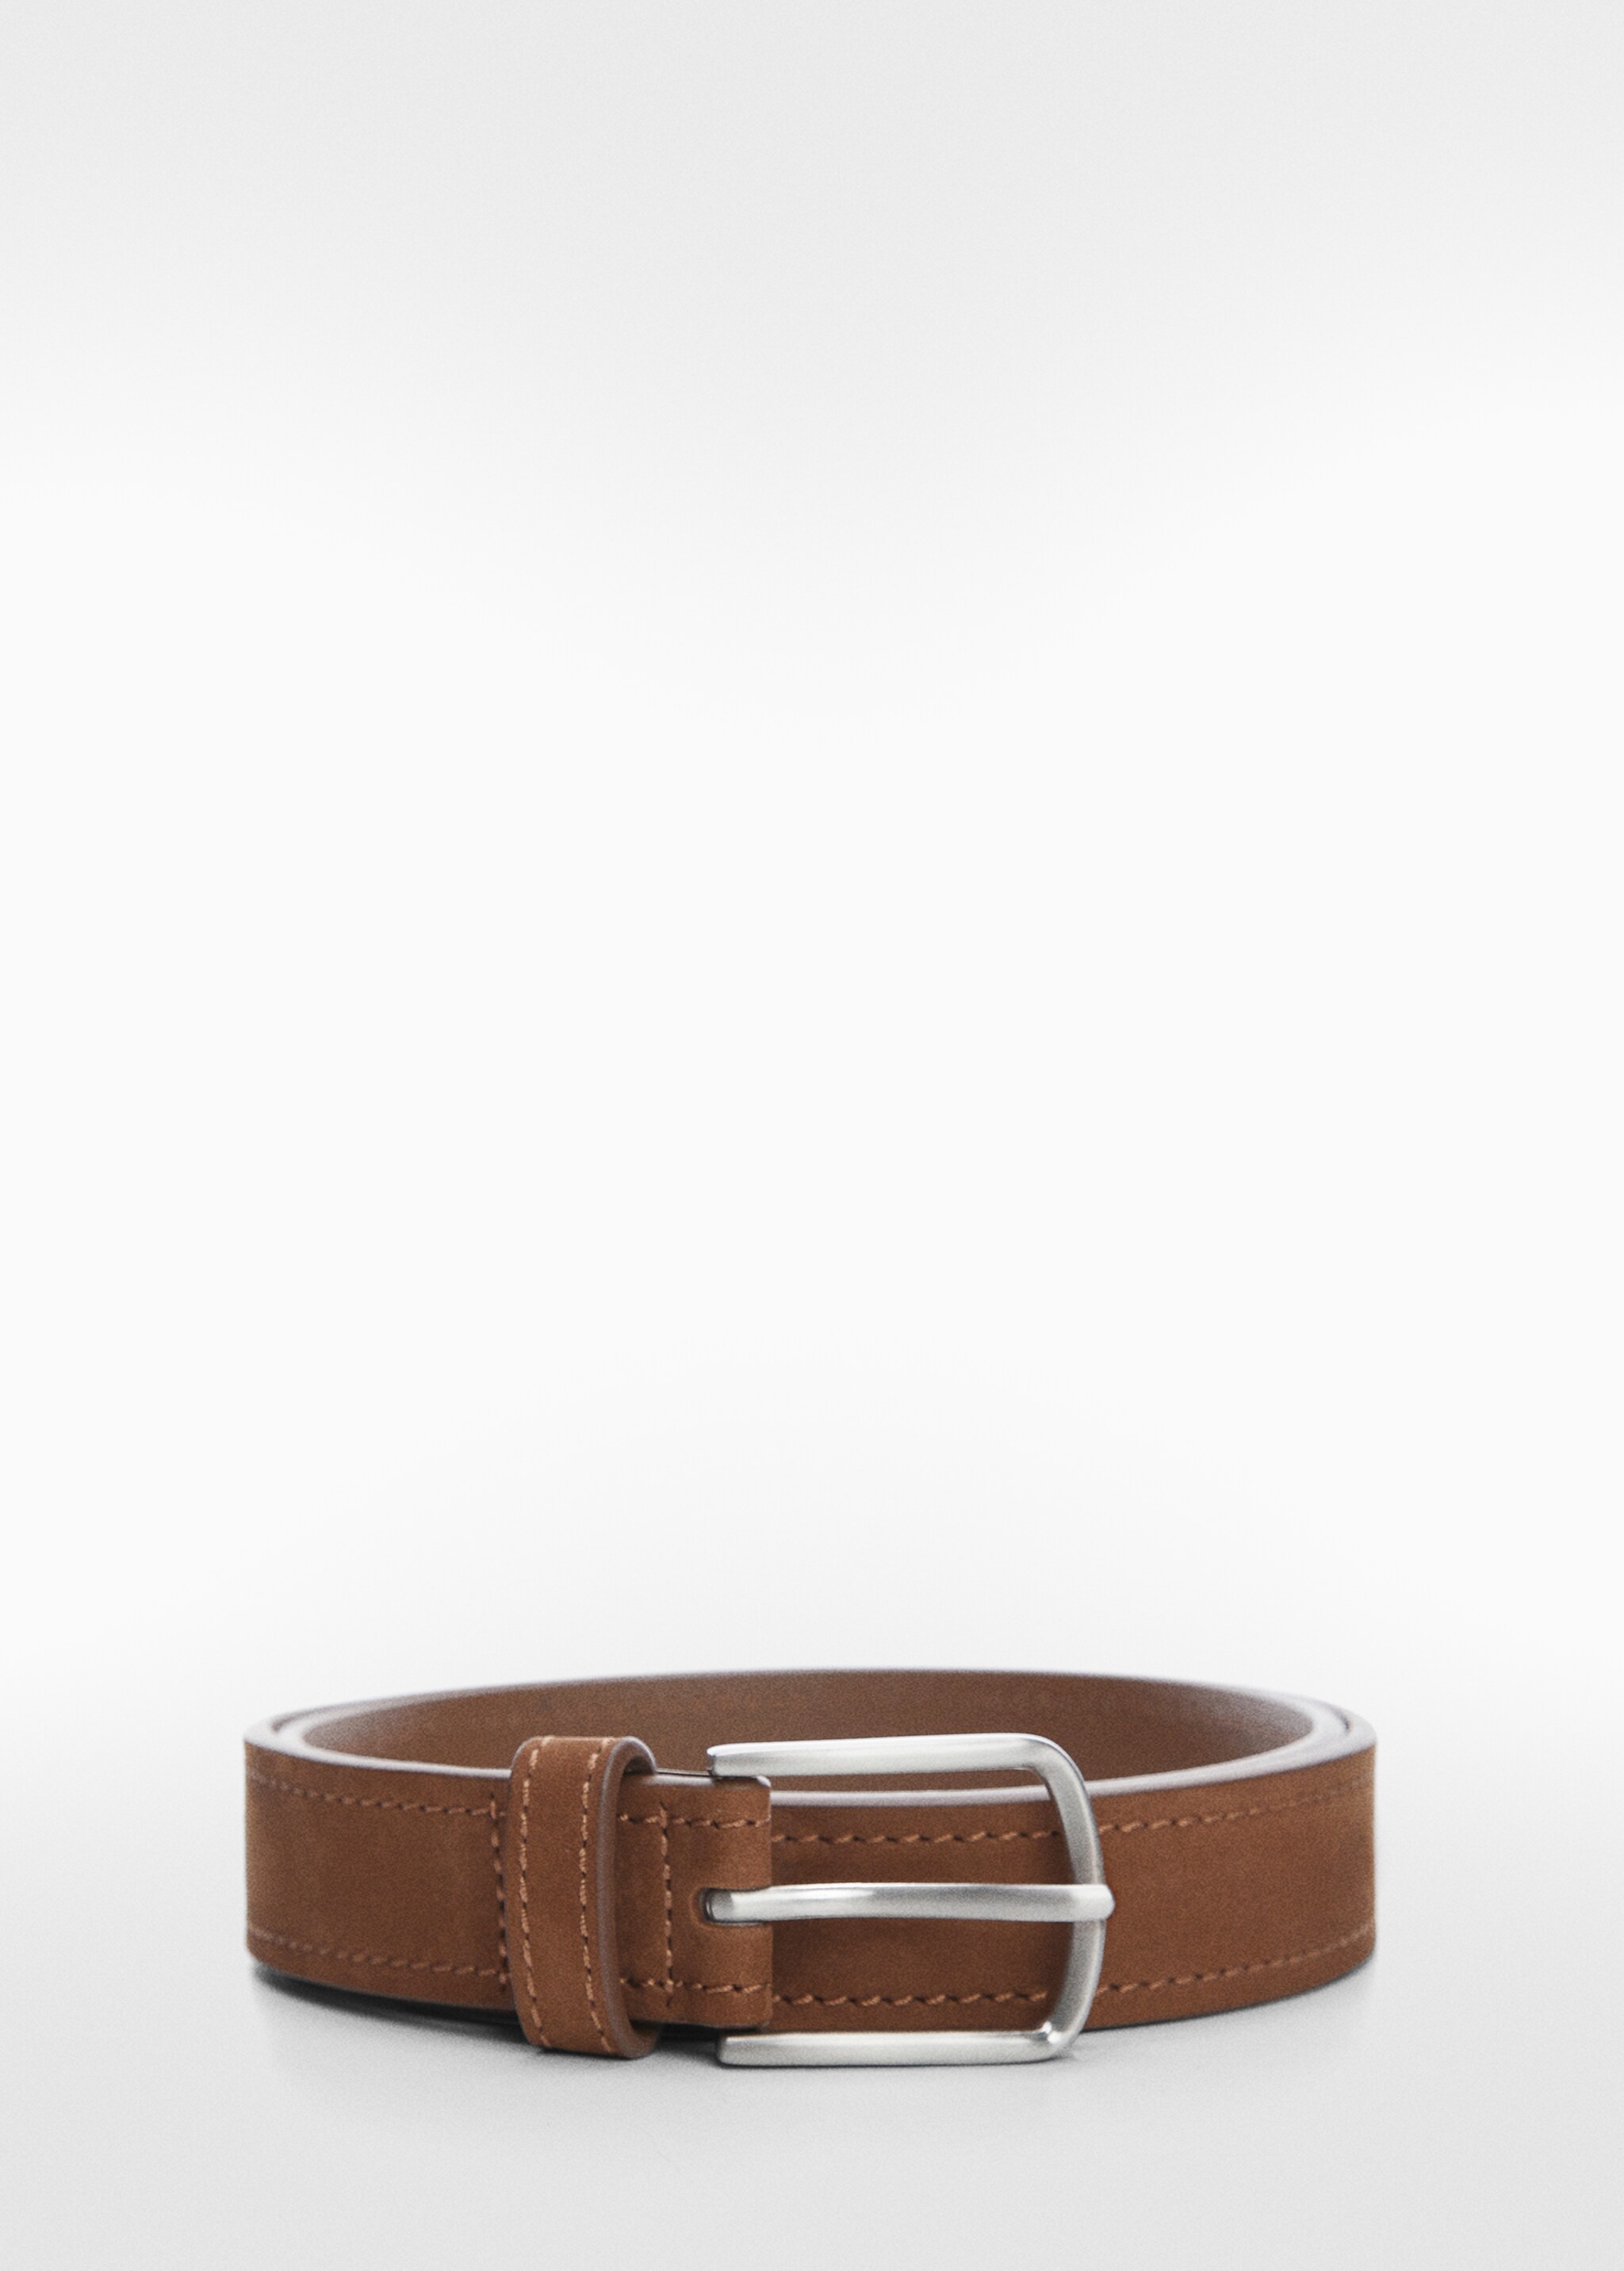 Suede leather belt - Article without model